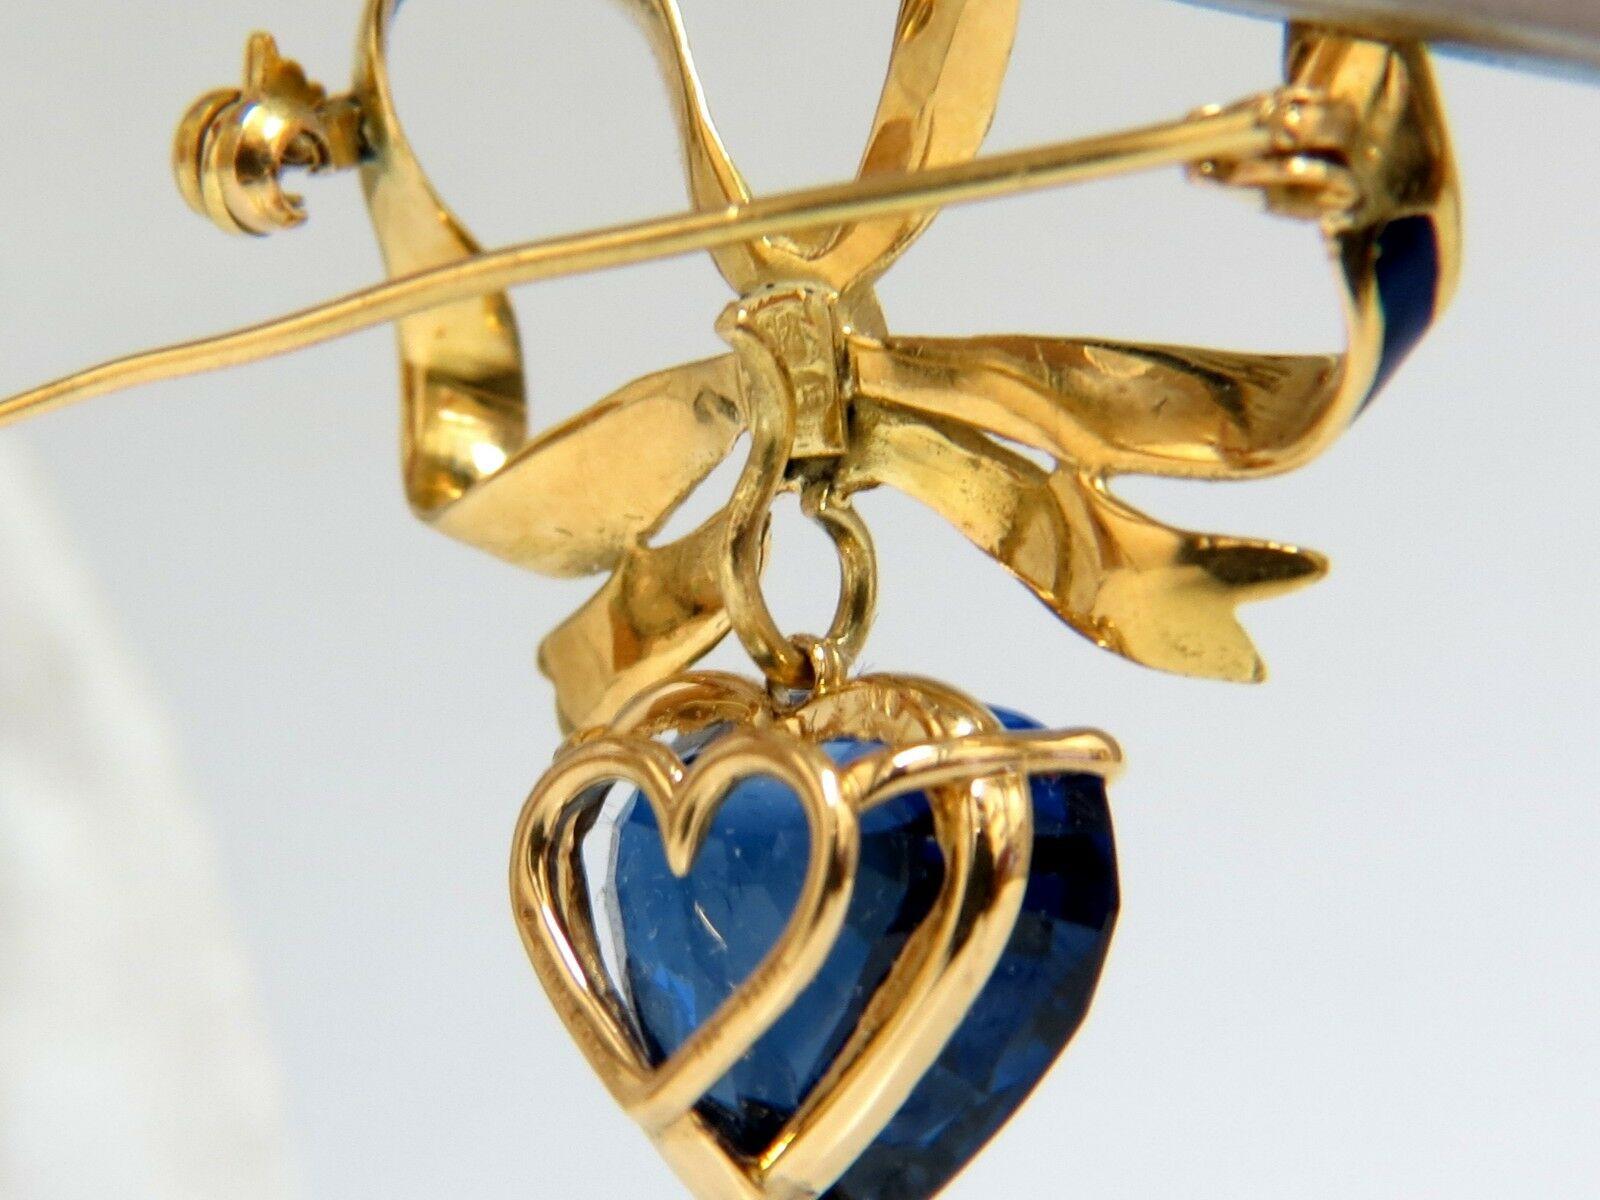 Democrat Love Sapphire Brooch

 10ct Lab Sapphire

Heart Cuts, Royal Blues.

Dangling on Patriotic Enamel Ribbon.

intricate details

6.3 grams. / 18kt yellow gold

Overall: 1.2 x 1.1 inch

Lab Sapphires: 14 x 11mm